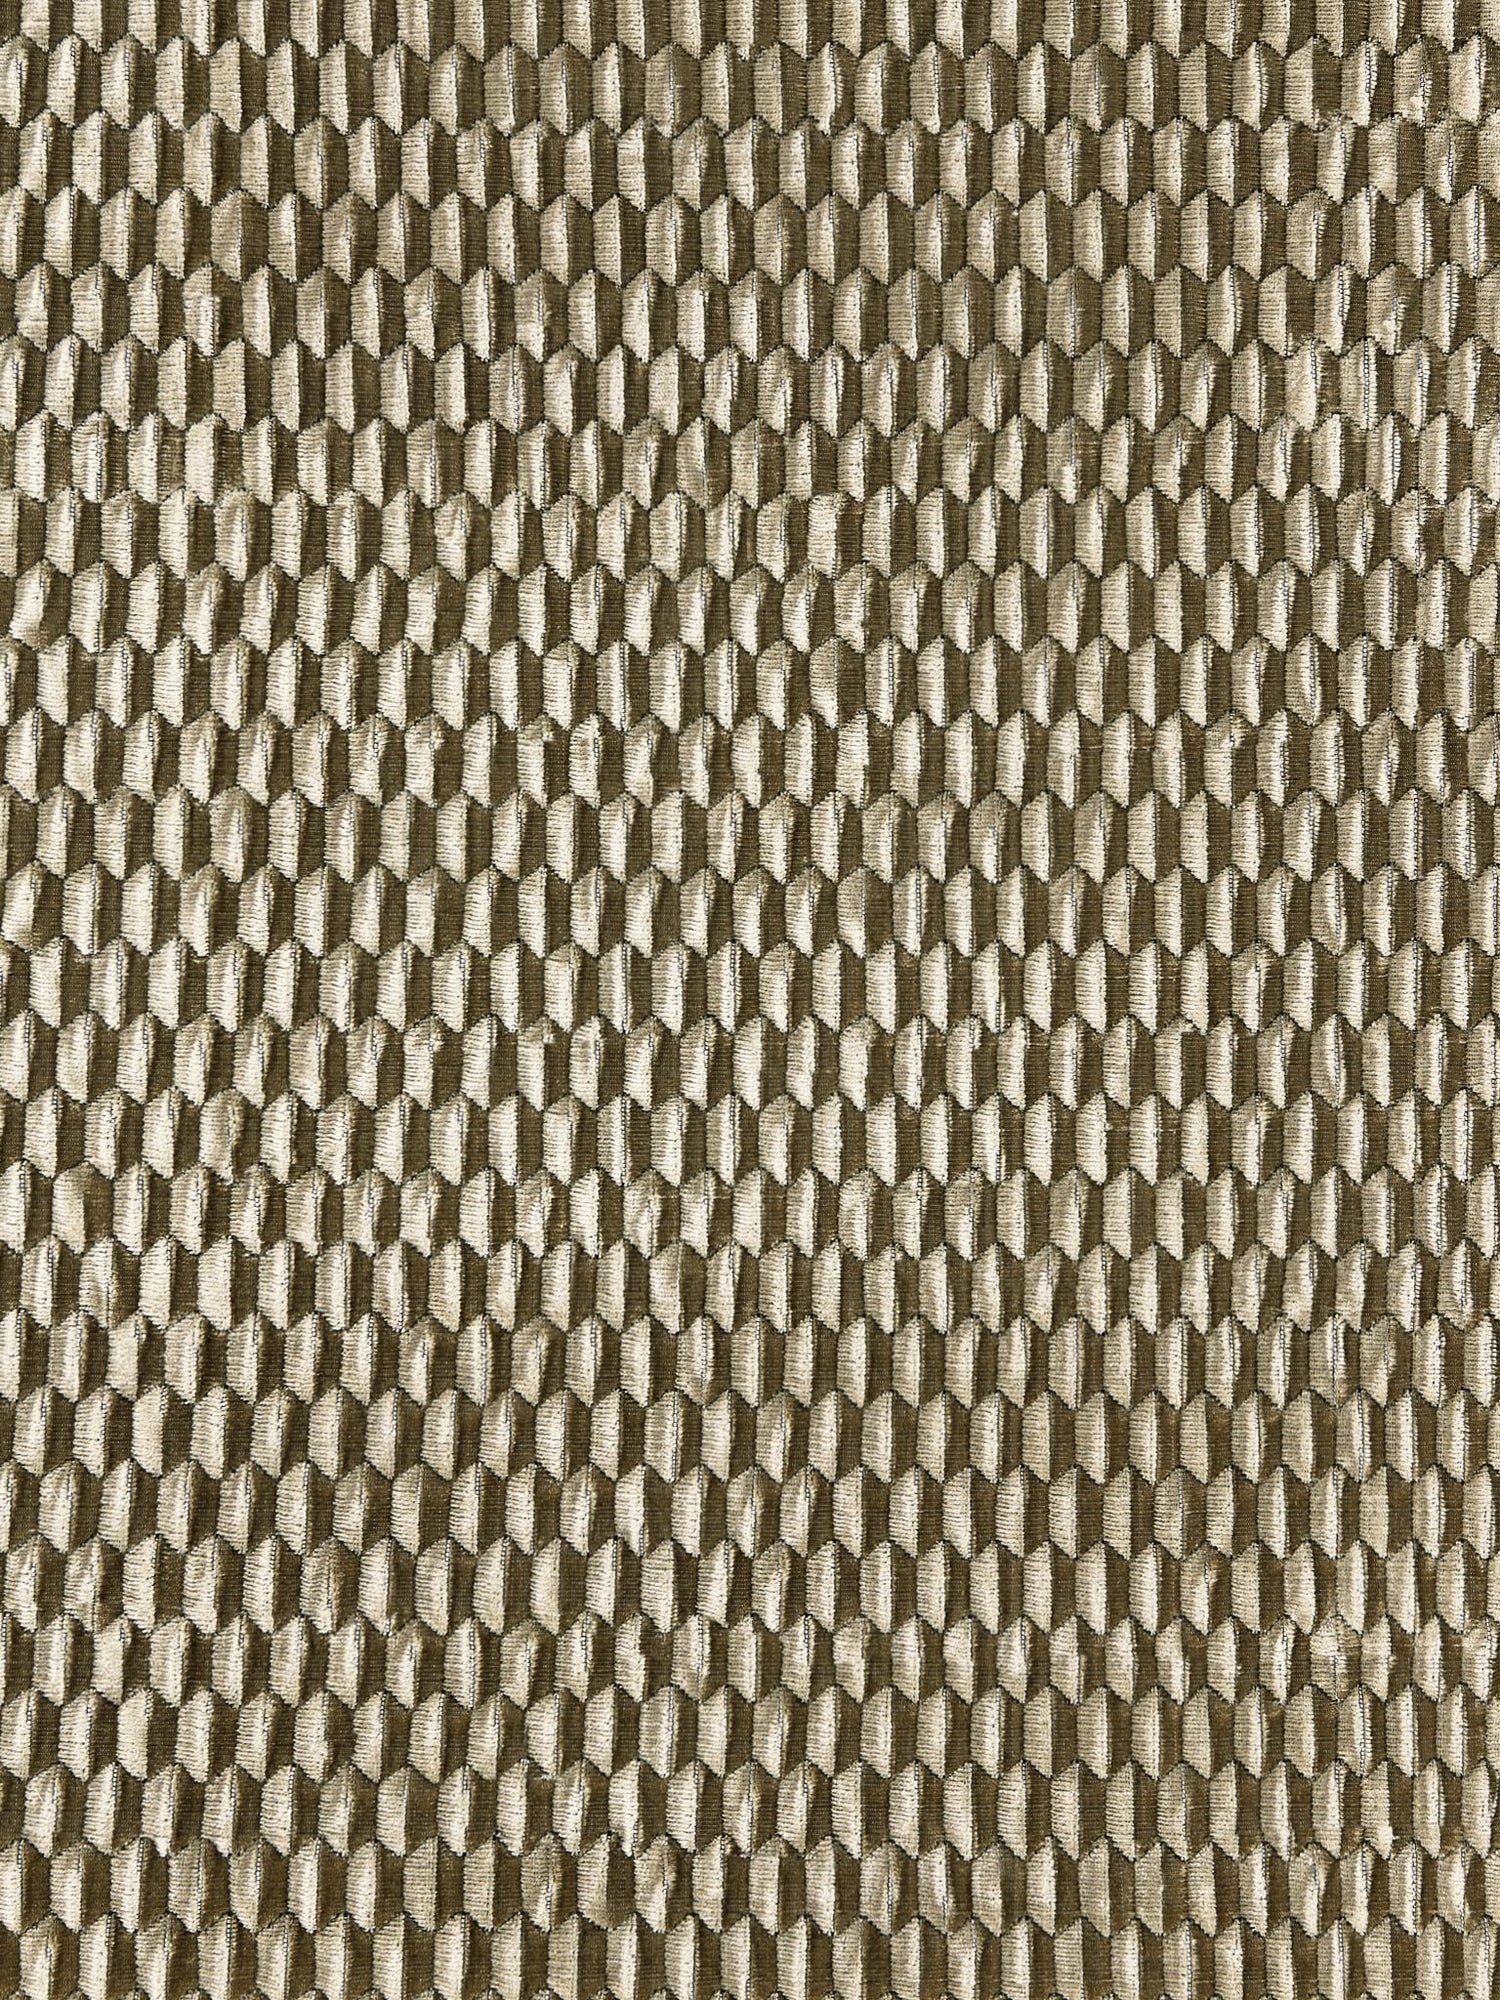 Allegra Velvet fabric in fawn color - pattern number SC 000127184 - by Scalamandre in the Scalamandre Fabrics Book 1 collection